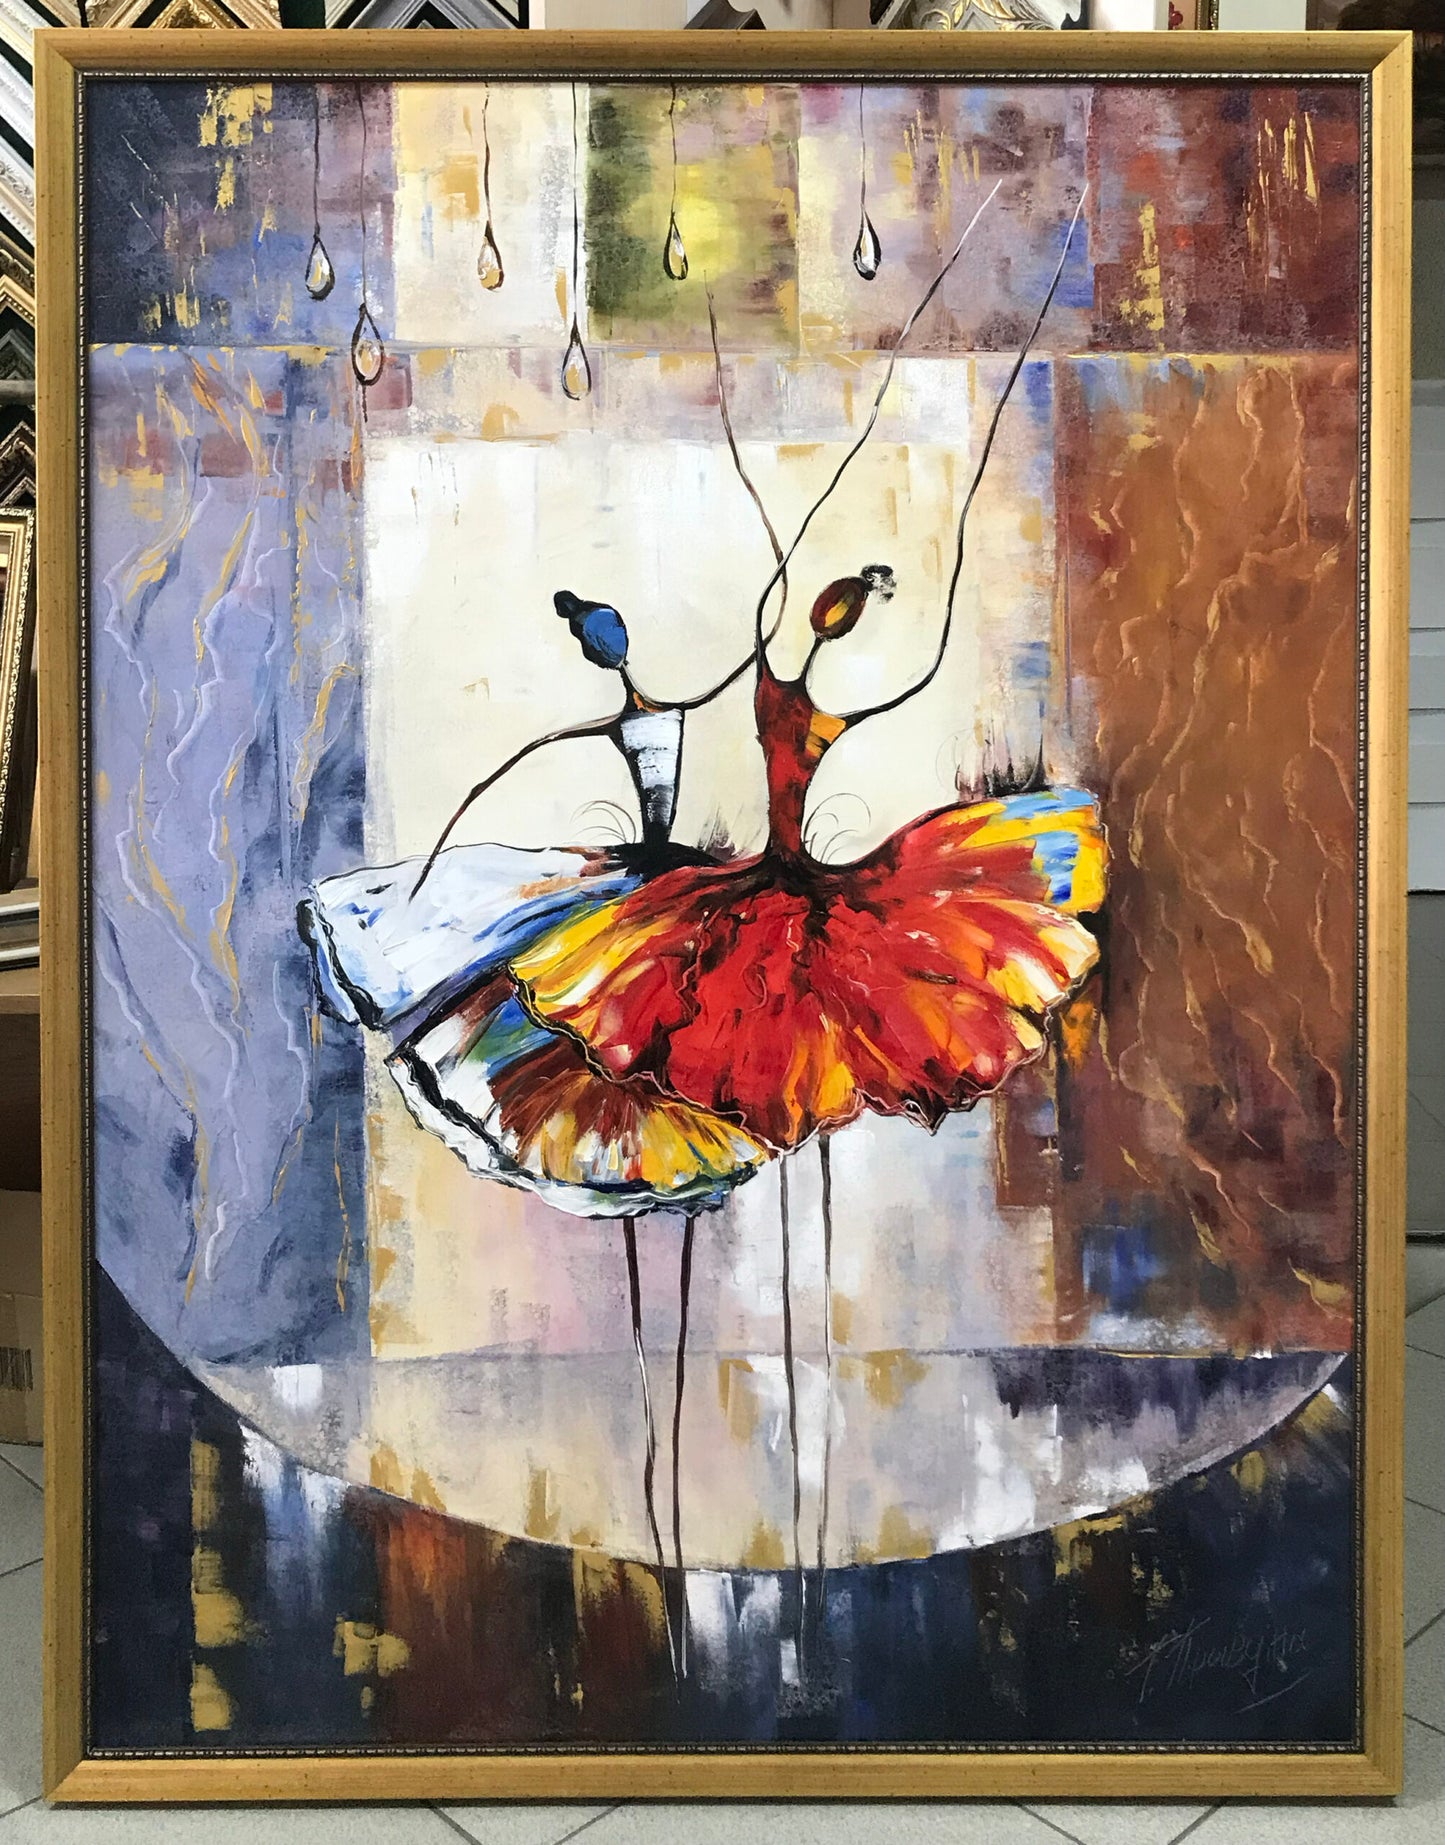 Abstract Ballerina Oil Painting Original Ballet Wall Art Dancer Painting on Canvas Modern Wall Decor Large Ballerinas Oil Painting Abstract Dancer Painting